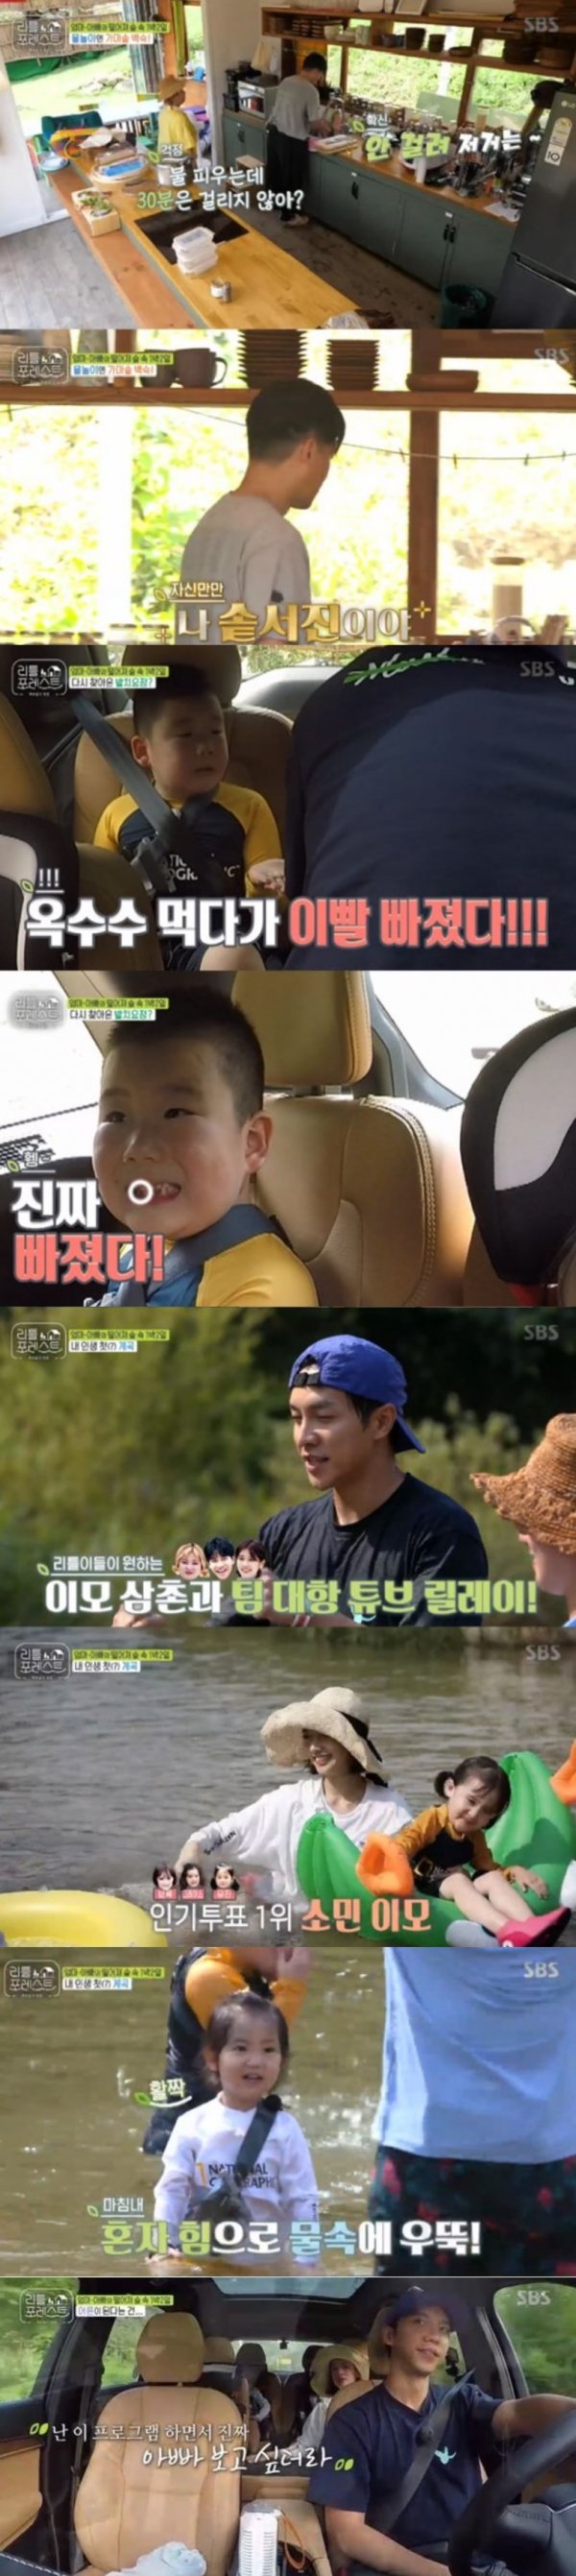 On SBS Little Forest broadcast on the 2nd, members and Little Lees valley water play were drawn.Lee Seo-jin and Park Na-rae are preparing for the summer specials for the Littles, and Lee Seo-jin decided to do chicken grooming on behalf of Park Na-rae, who has chicken phobia.However, Lee Seo-jin was increasingly manipulated by Park Na-rae cooking bot and laughed.In the meantime, Lee Seo-jin, who is a cooked Seojin, expressed firewood, saying, I am a specialist in the fireplace. However, he suffered unexpected sufferings by burning unexpected heat waves.In addition, Lee Han-yi suffered another tooth-sucking death. Lee felt this shaking in the garden, and Lee Seung-gi said, Lets pull it out with corn hair.It is the first time in Korea, he persuaded, but it did not work.In the end, Lee fell out of his teeth while eating boiled corn in the car, and gave Lee Seung-gi and Lee Seo-jin a big smile.Littles later enjoyed full-scale valley water play, but Eugene felt afraid of water play, and eventually fell into the water while trying to ride a frog tube.At that moment, Jung So-min reached out to hold Eugenei and Eugenei did not cry.Jung So-min said, I told him that I should not be embarrassed, so I said it was okay, but Baro said it casually. He felt the importance of communicating with children.In the meantime, popular votes among members were also held.Lee Han-i and Jung Heon-yi selected Lee Seung-gi, Brooke and Grace, and Eugene Lee Jung So-min, and Park Na-rae won the unexpected 